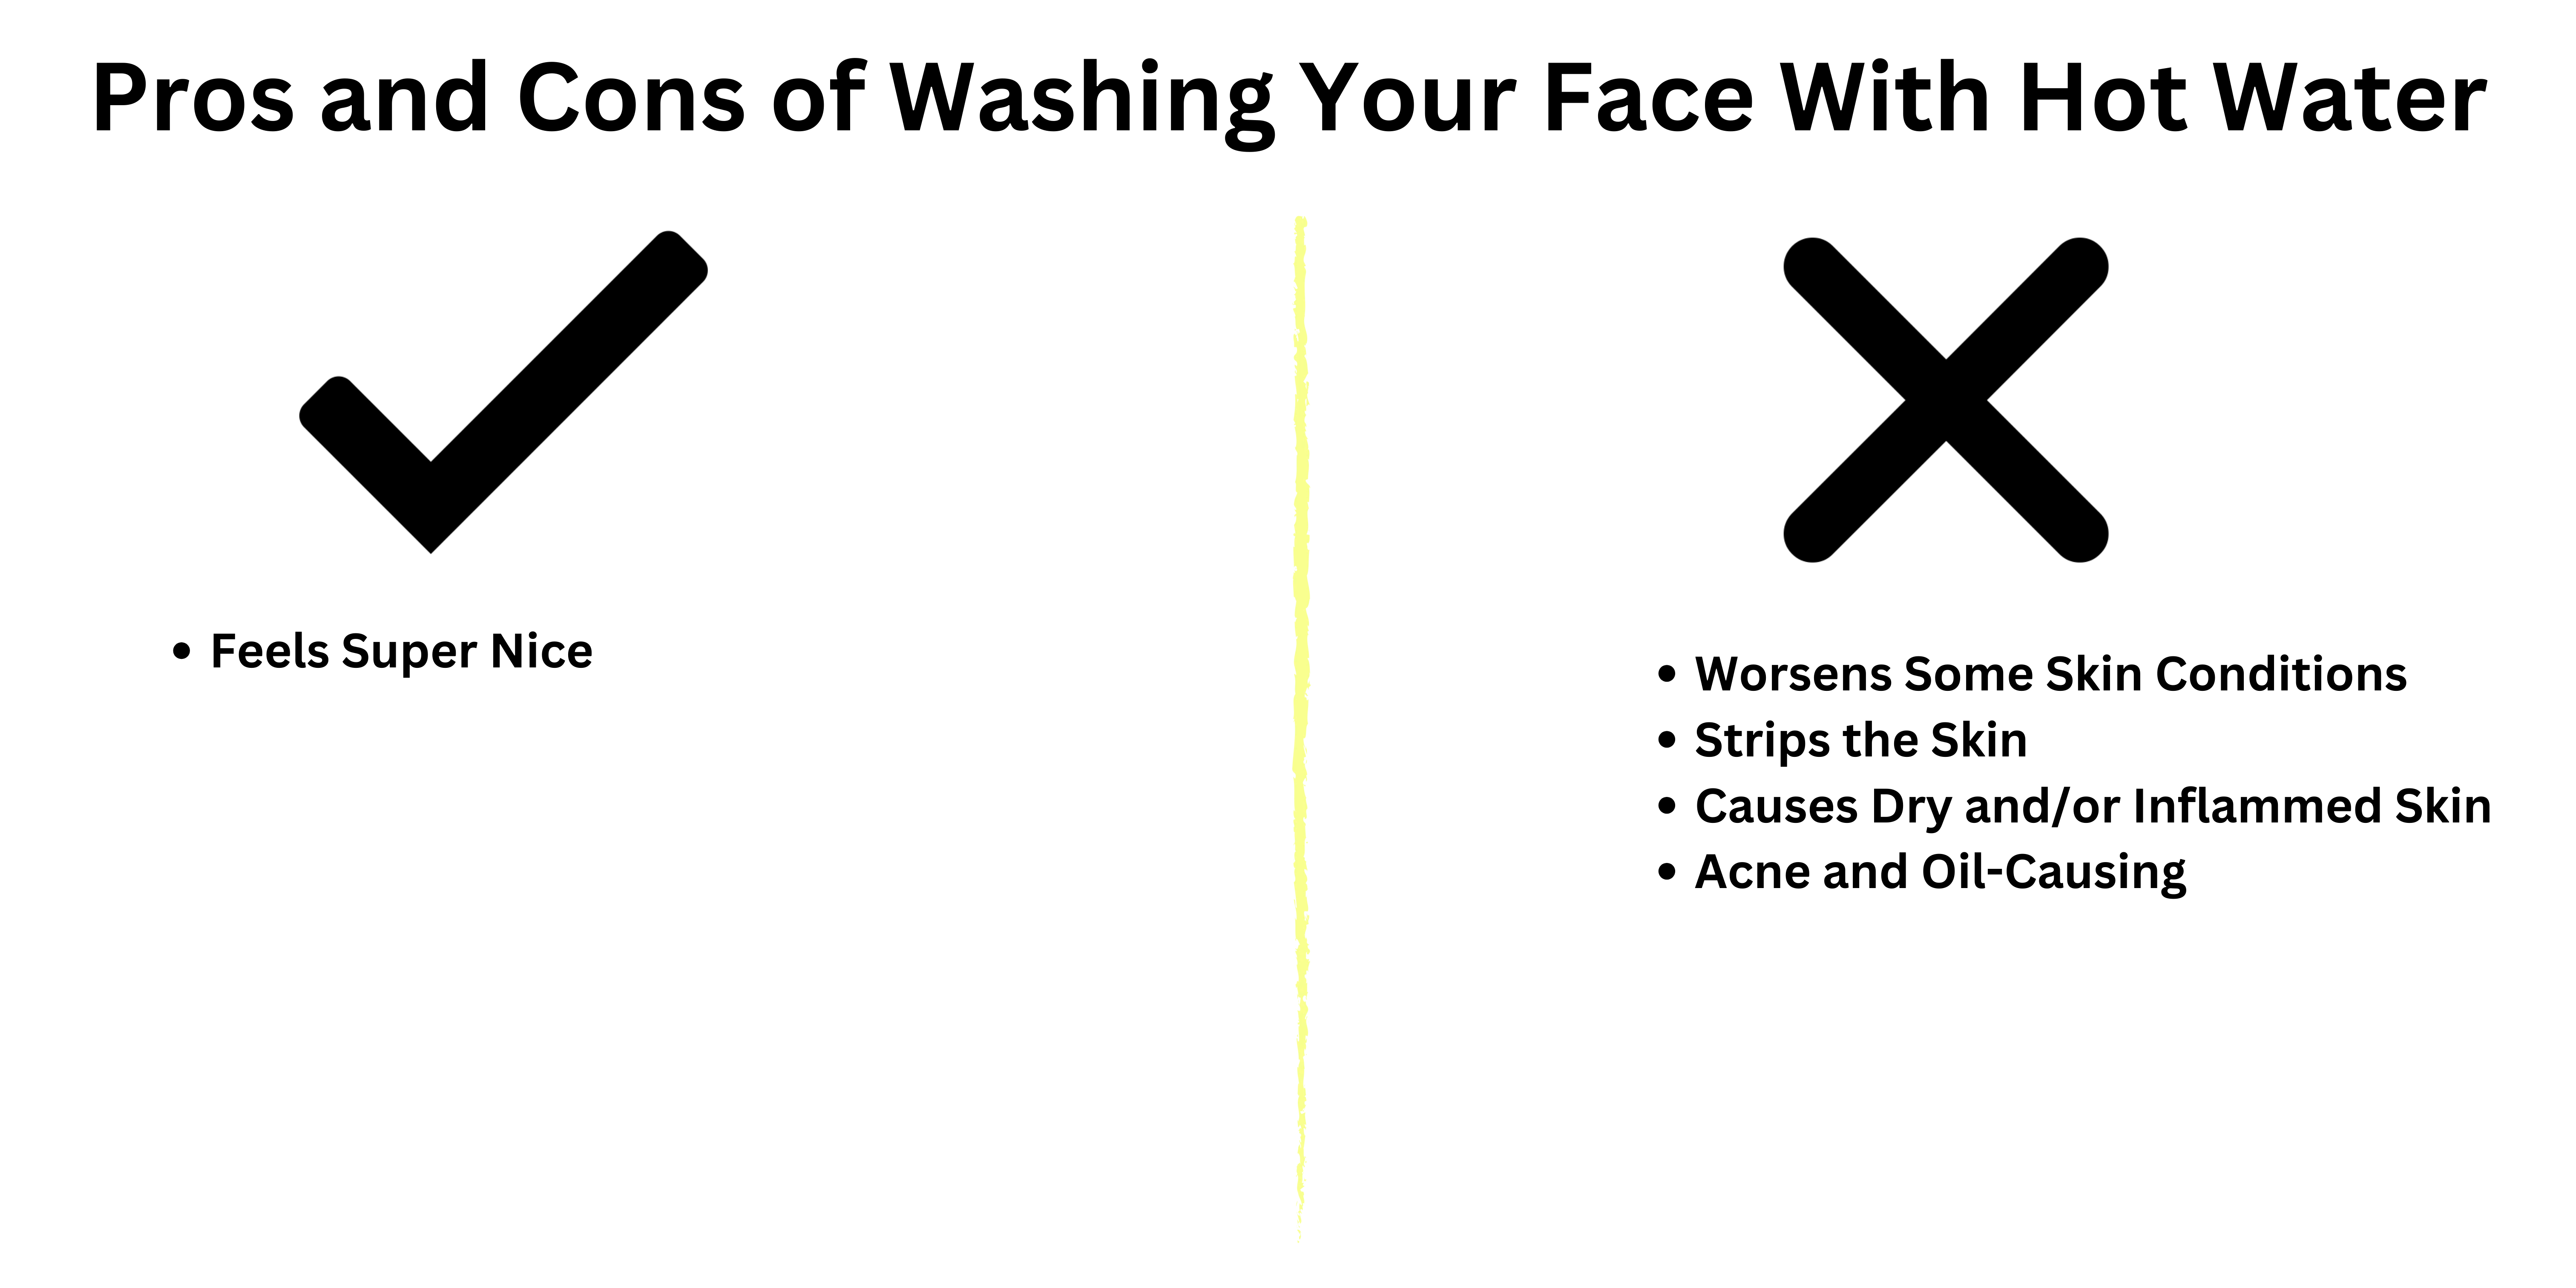 Is it good to wash your face with cold water? What does cleansing with cold water do to your skin?